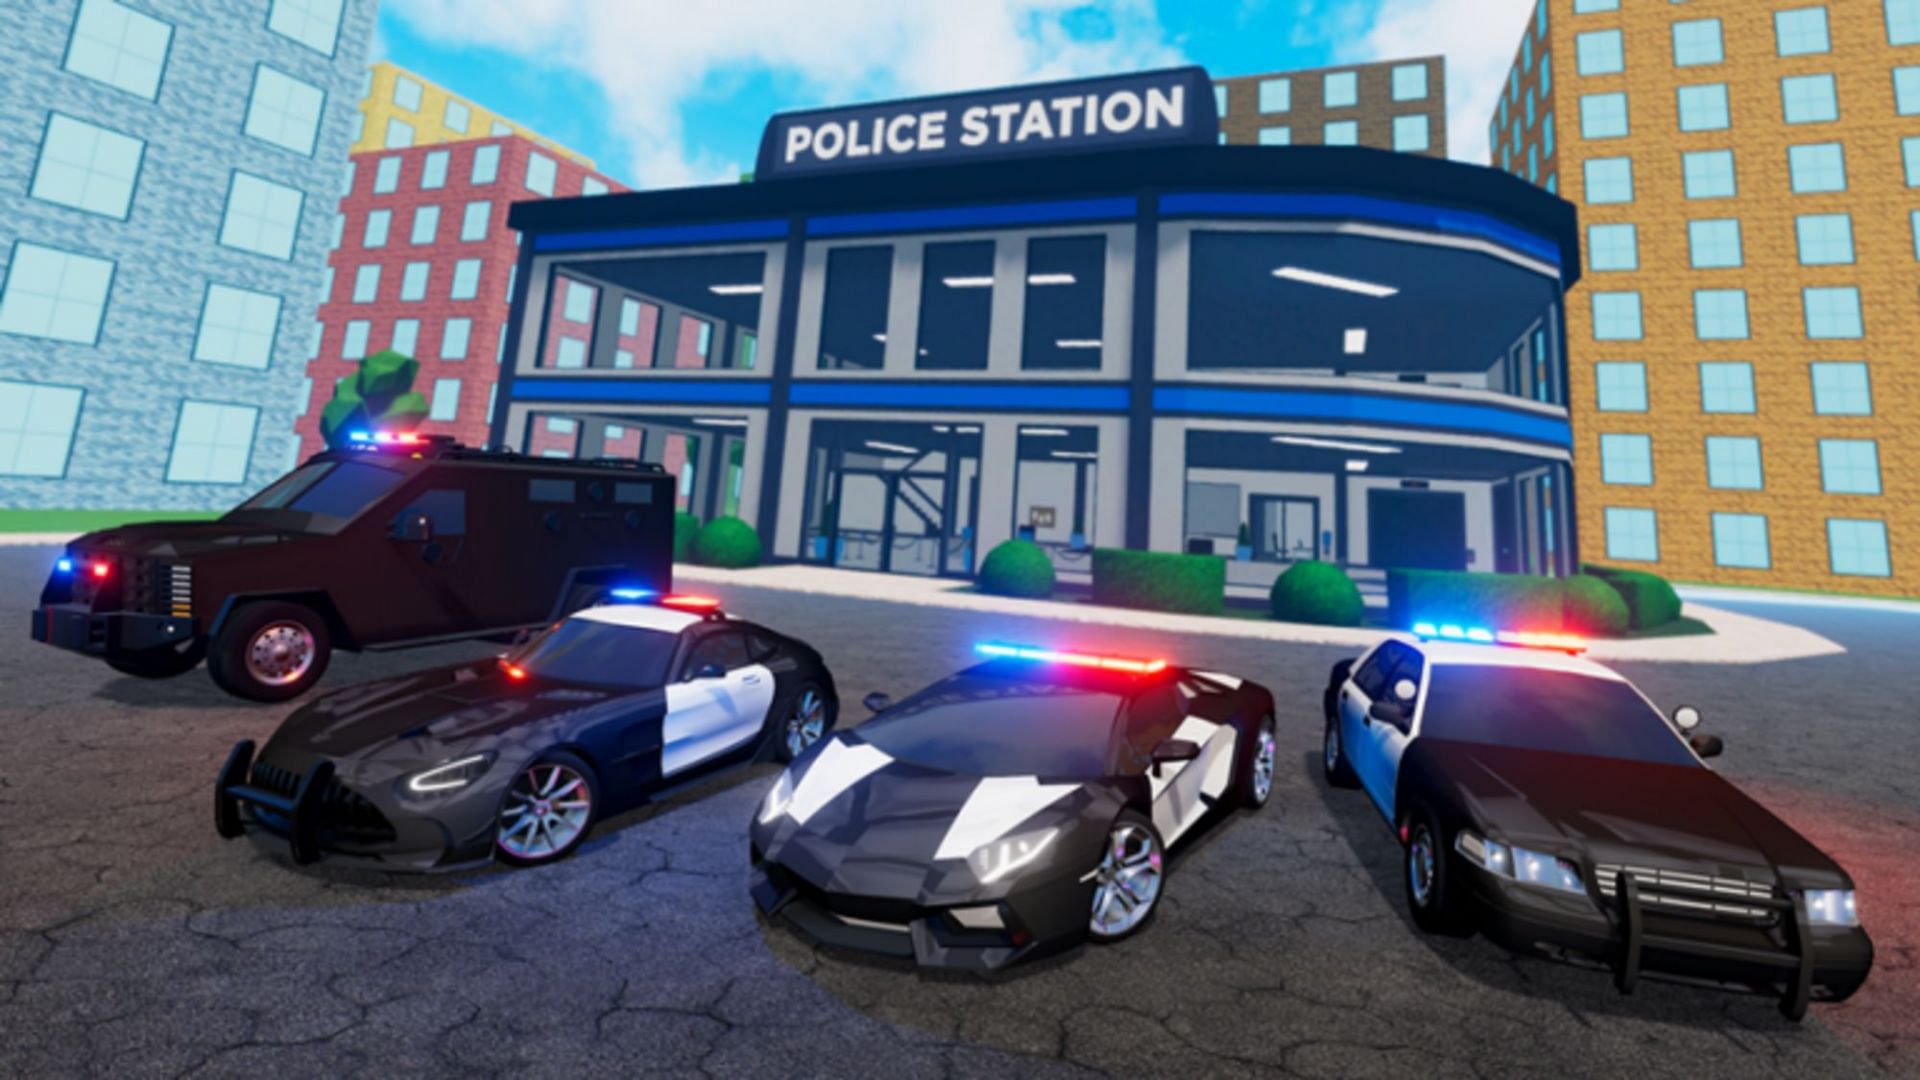 NEW* ALL WORKING CODES FOR CAR DEALERSHIP TYCOON 2023! ROBLOX CAR  DEALERSHIP TYCOON CODES 